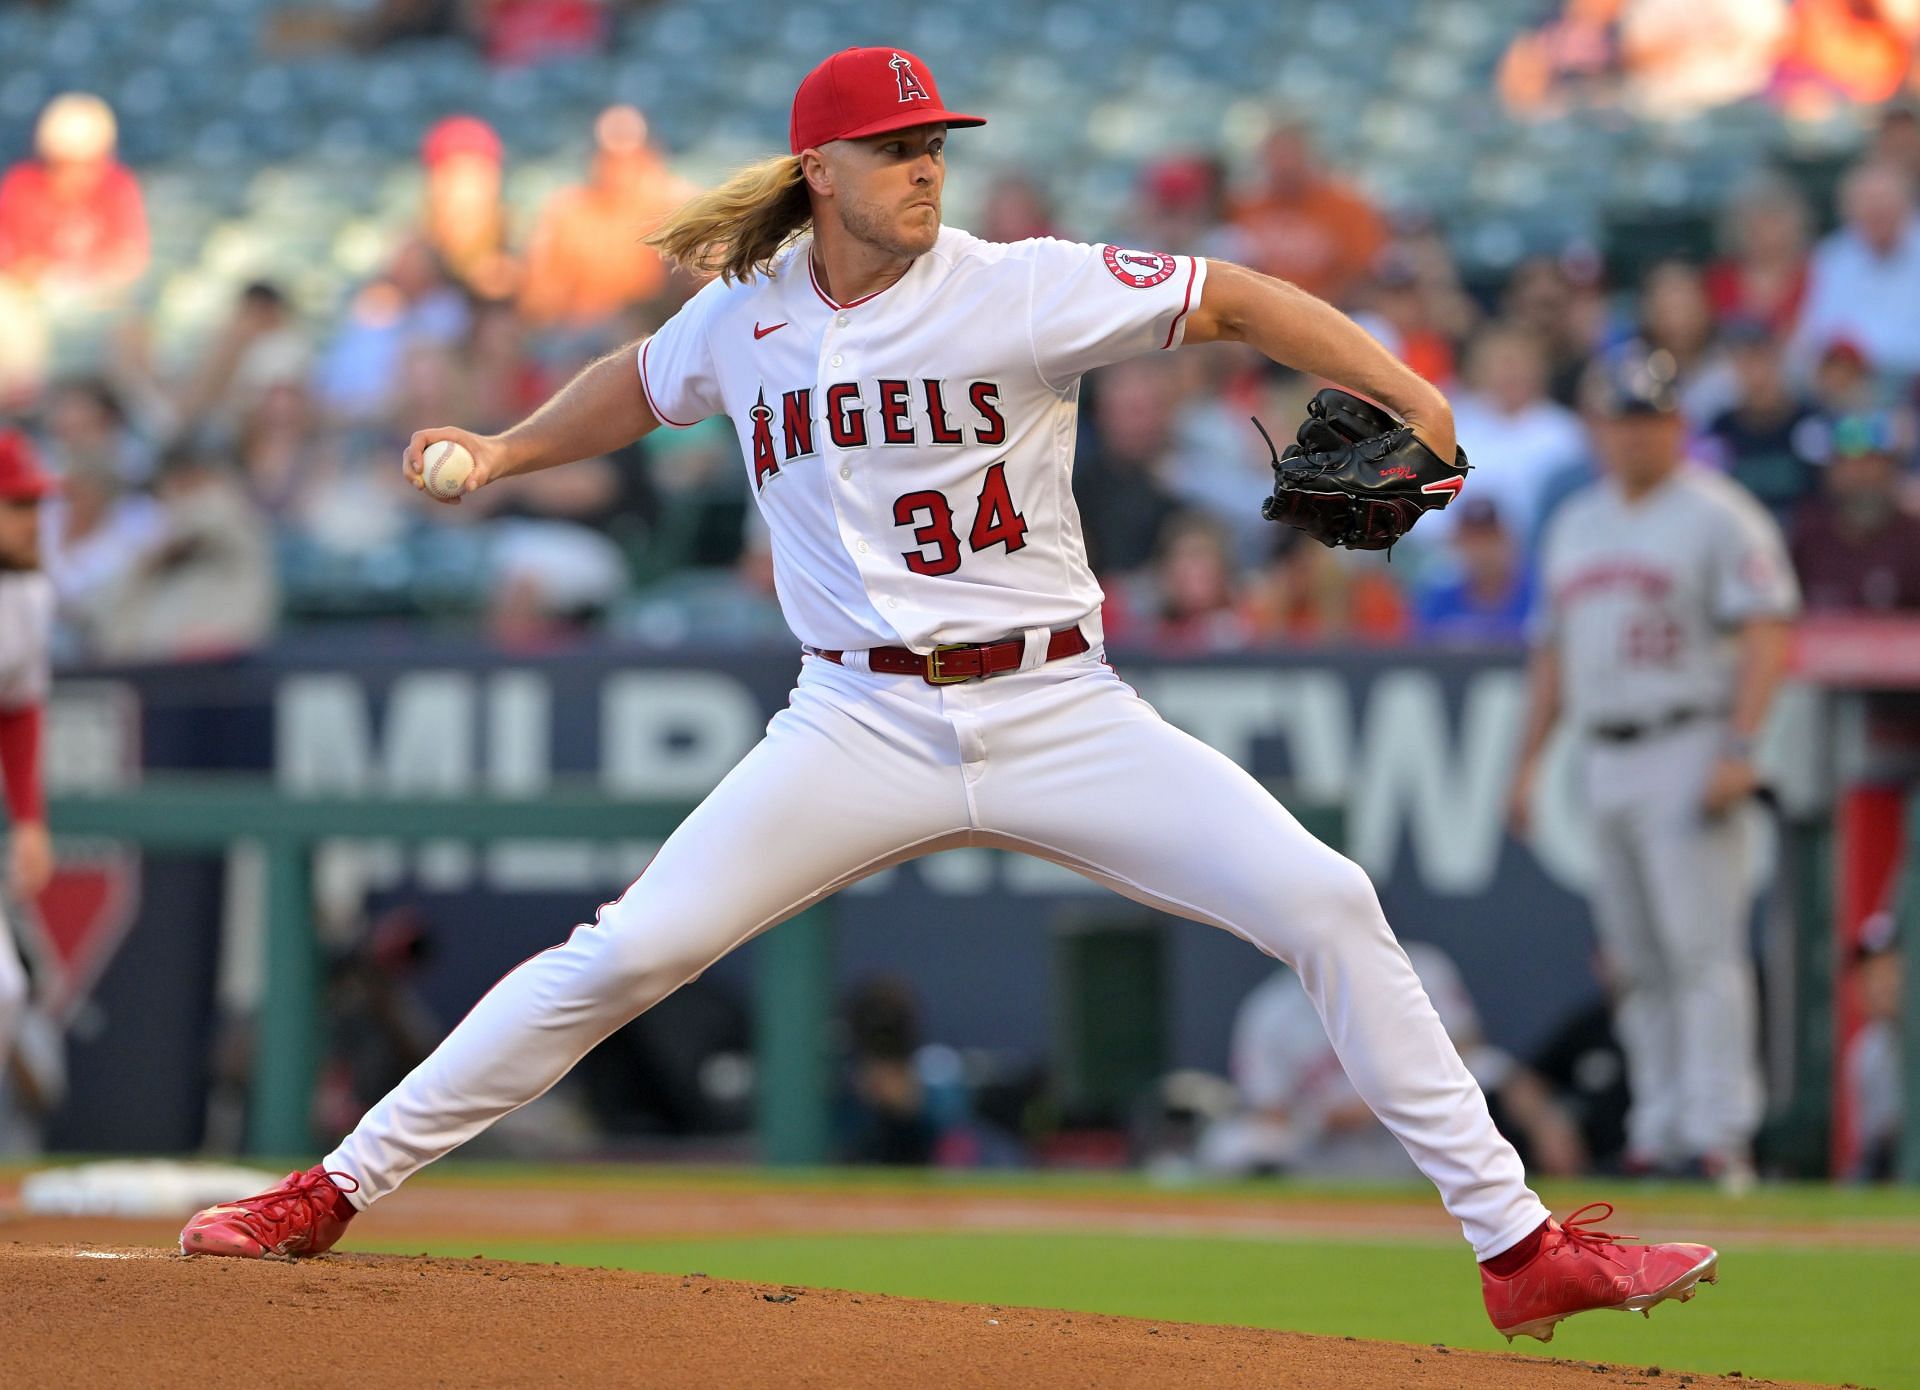 Noah Syndergaard #34 of the Los Angeles Angels pitches in the first inning against the Houston Astros at Angel Stadium